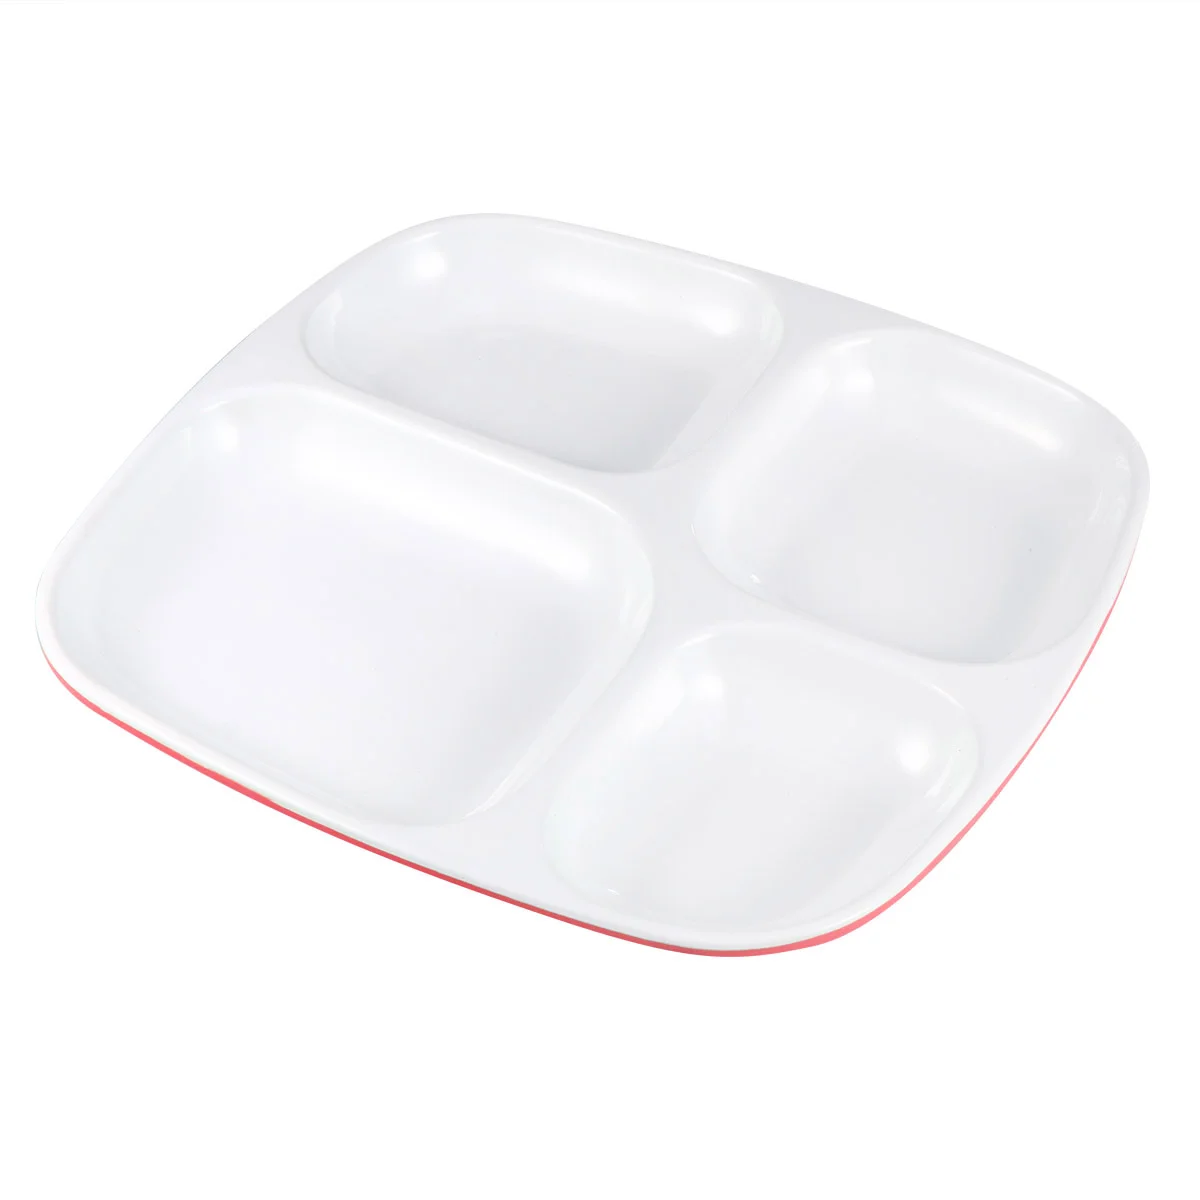 

Plates Plate Dividedtray Dish Dinner Serving Compartment Control Diet Planninglunch Kids Portion Meal Adults Melamine